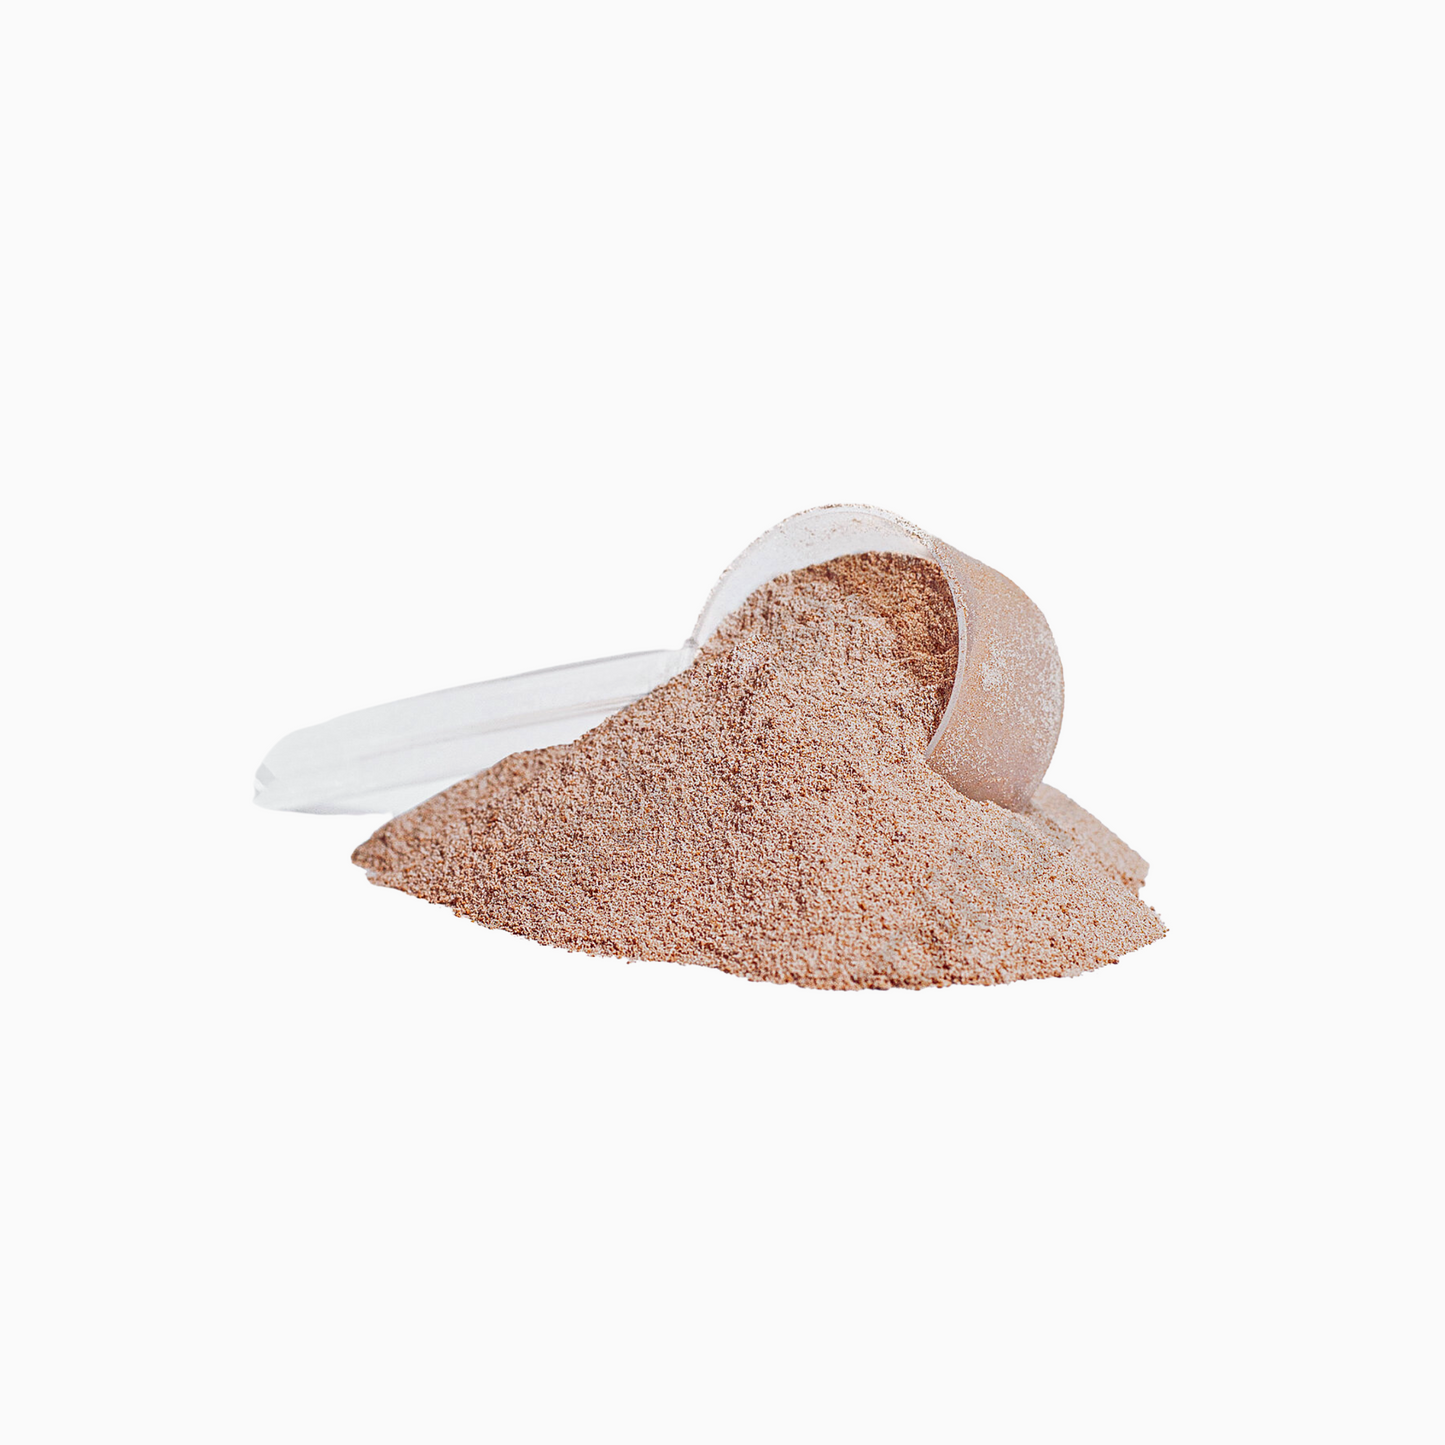 "GRACE" Grass-Fed Collagen Peptides Powder (Chocolate)